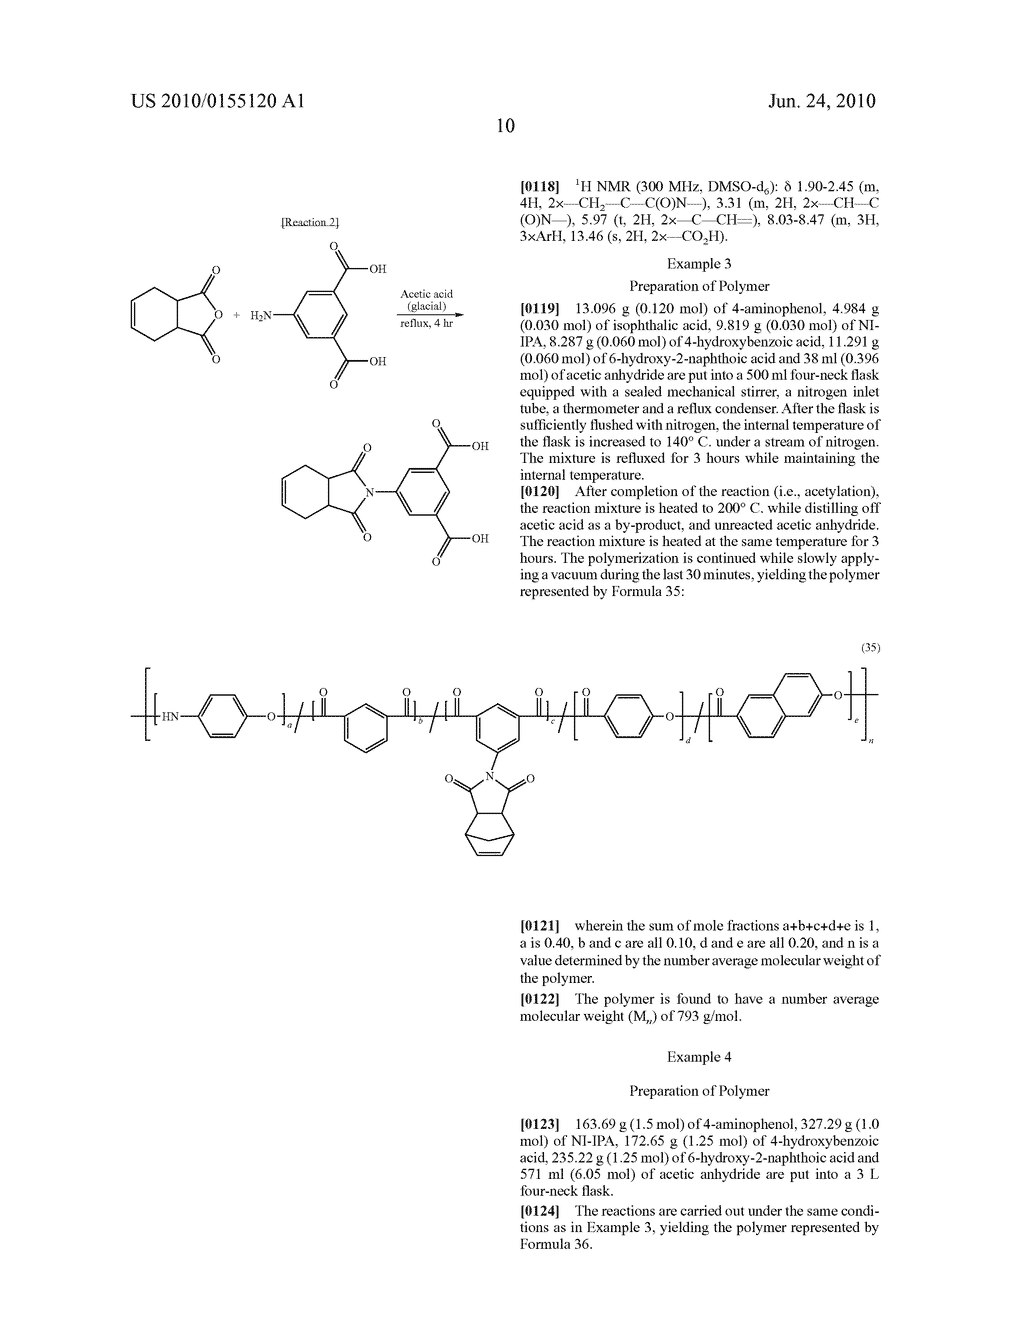 THERMOSETTING OLIGOMER OR POLYMER, THERMOSETTING RESIN COMPOSITION INCLUDING THE OLIGOMER OR POLYMER, AND PRINTED CIRCUIT BOARD USING THE COMPOSITION - diagram, schematic, and image 14